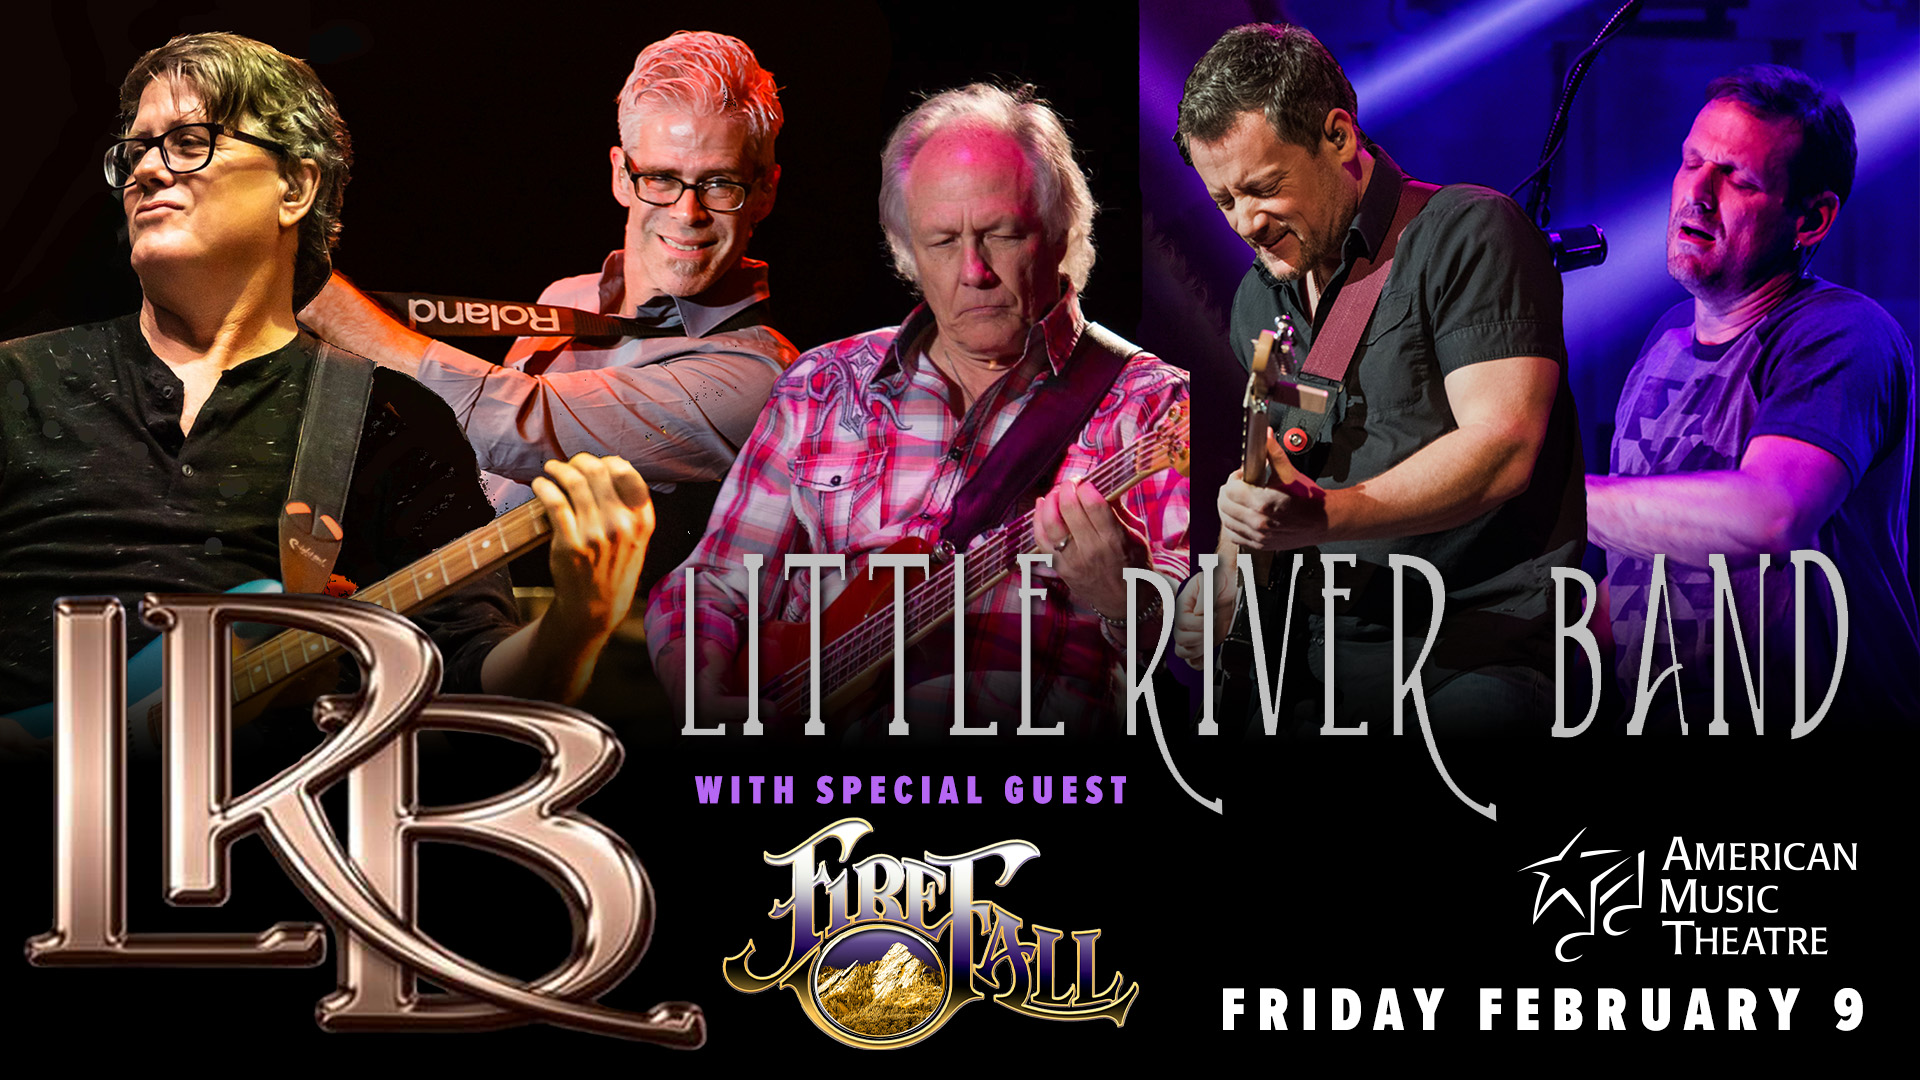 Littler River Band with special guest Firefall